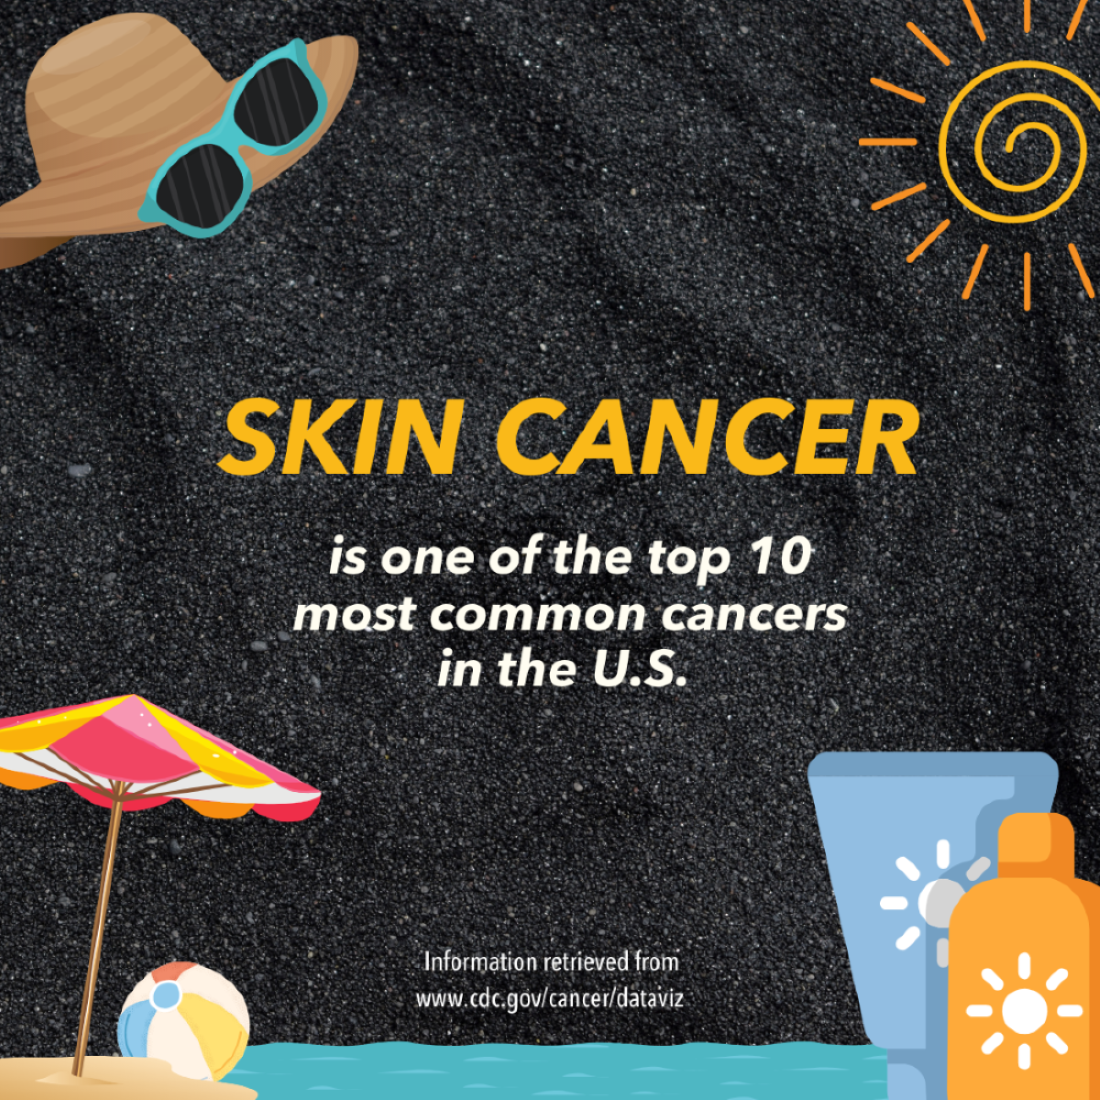 Text reads: Skin Cancer is one of the top 10 most common cancers in the U.S. Background is made up of black sand with images of sunglasses, hat, beach umbrella, beach ball, ocean waves and suncreen around border